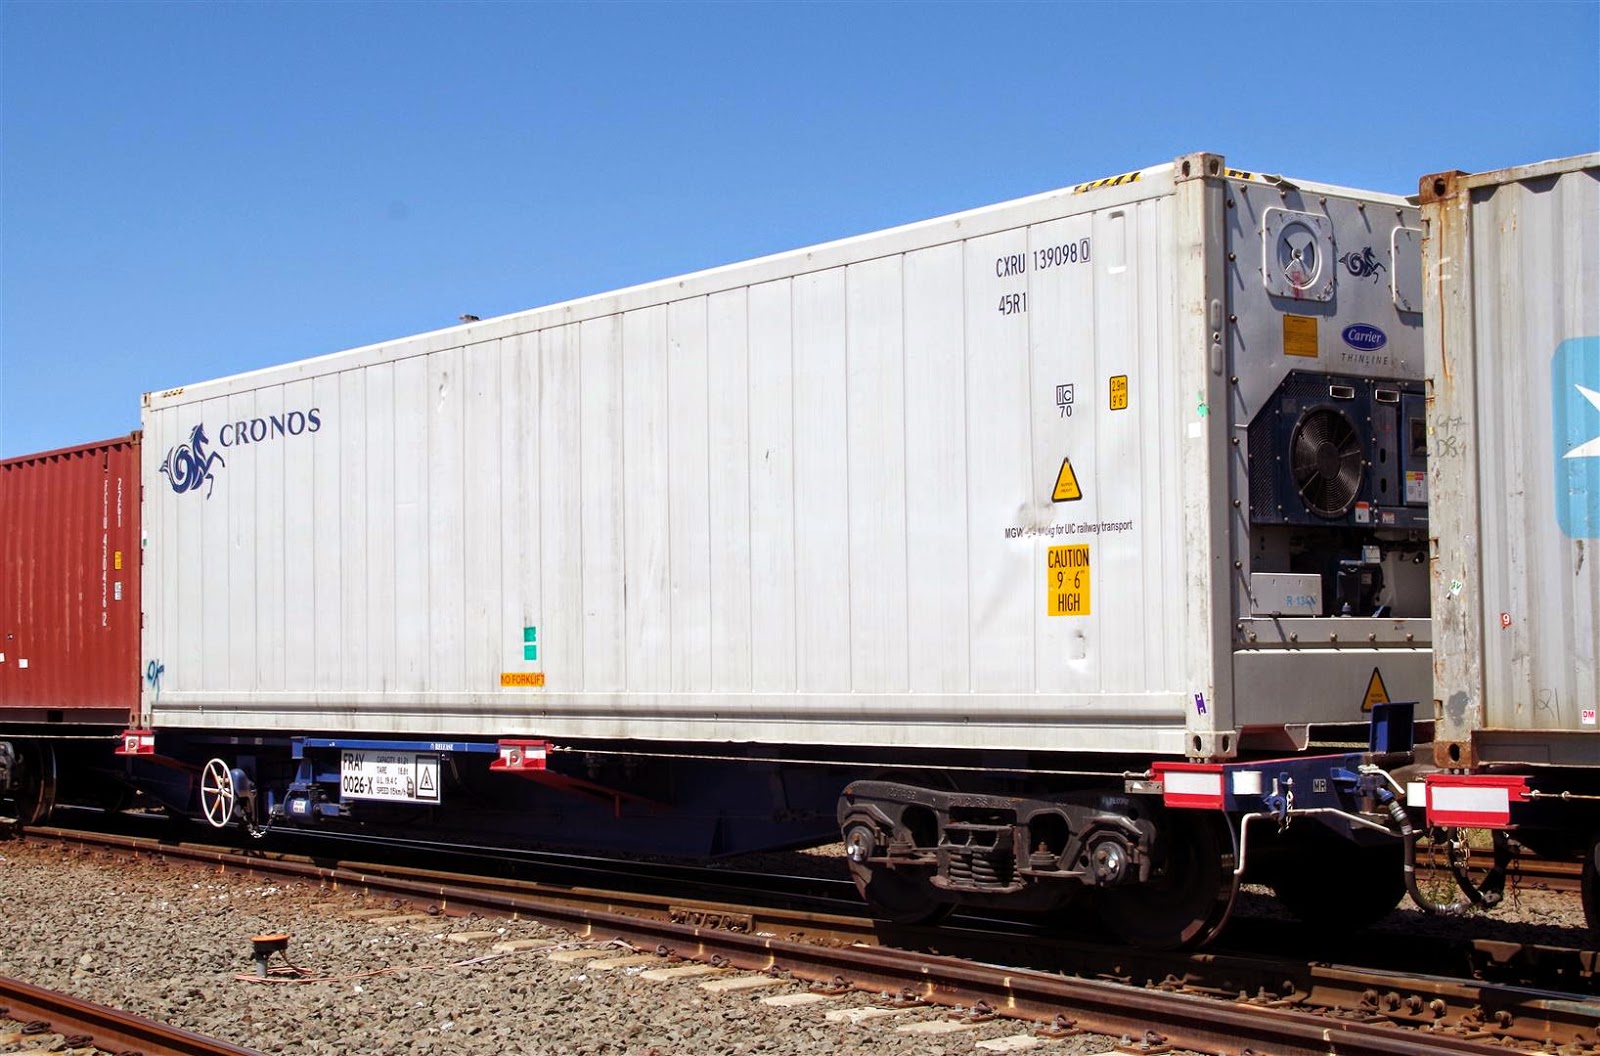 Rollingstock News Reefer Containers